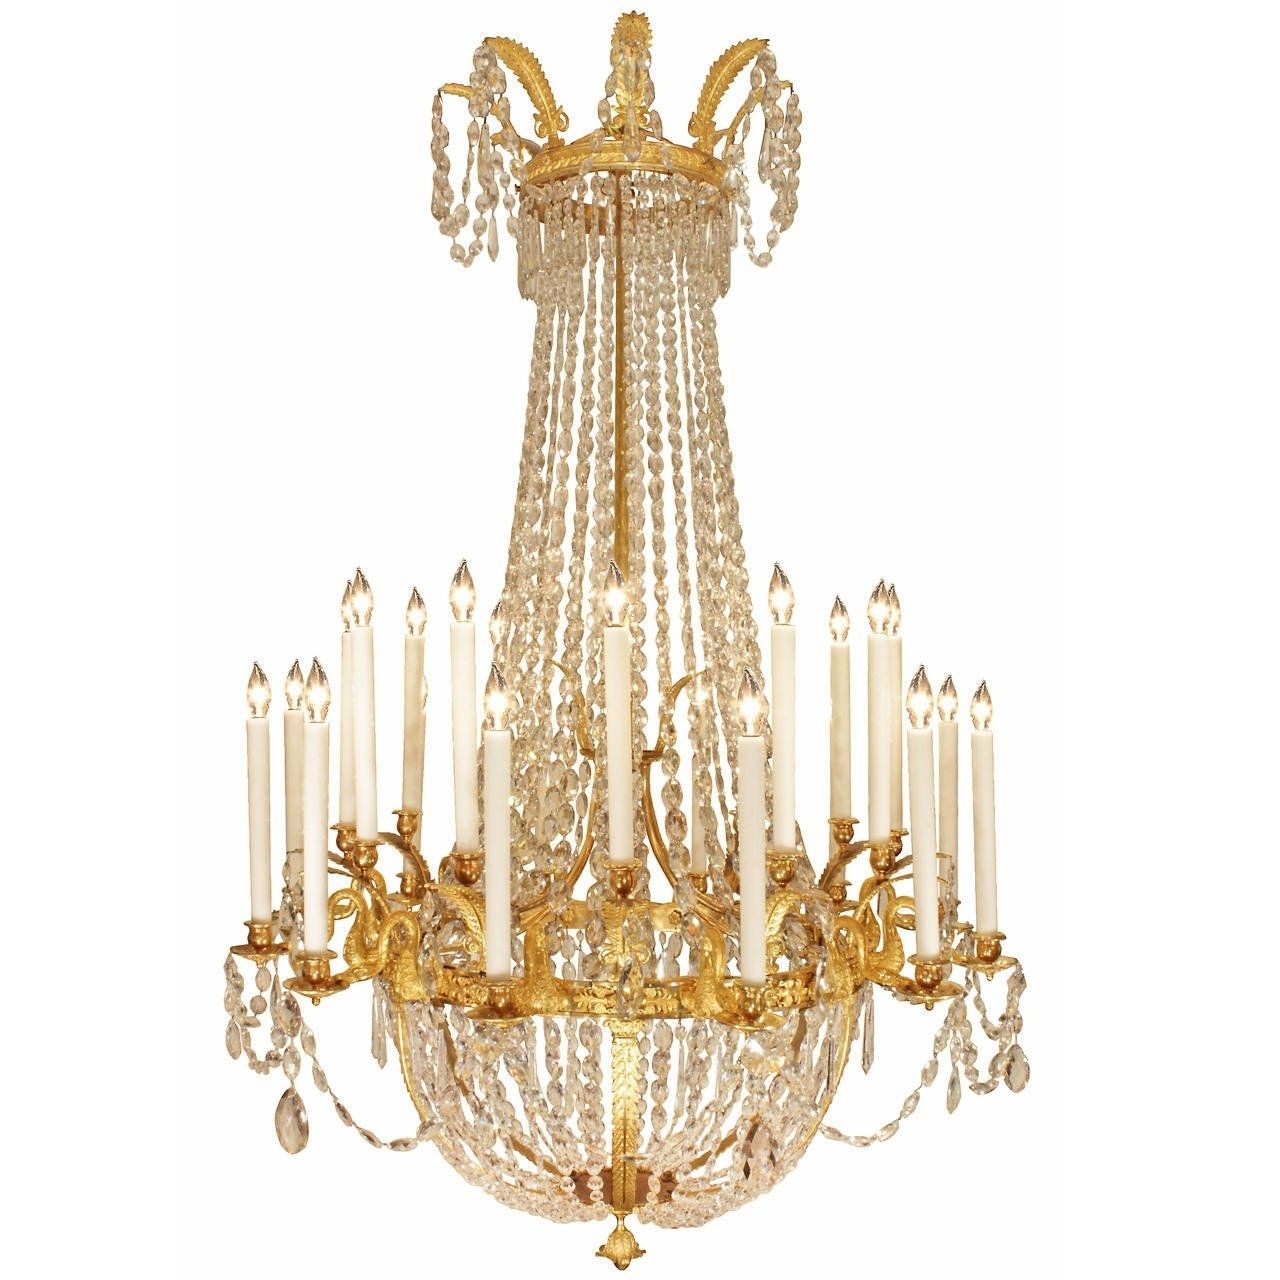 French Style Chandelier Pertaining To Well Known French 19th Century Neoclassical Style Ormolu And Crystal Chandelier (View 5 of 15)